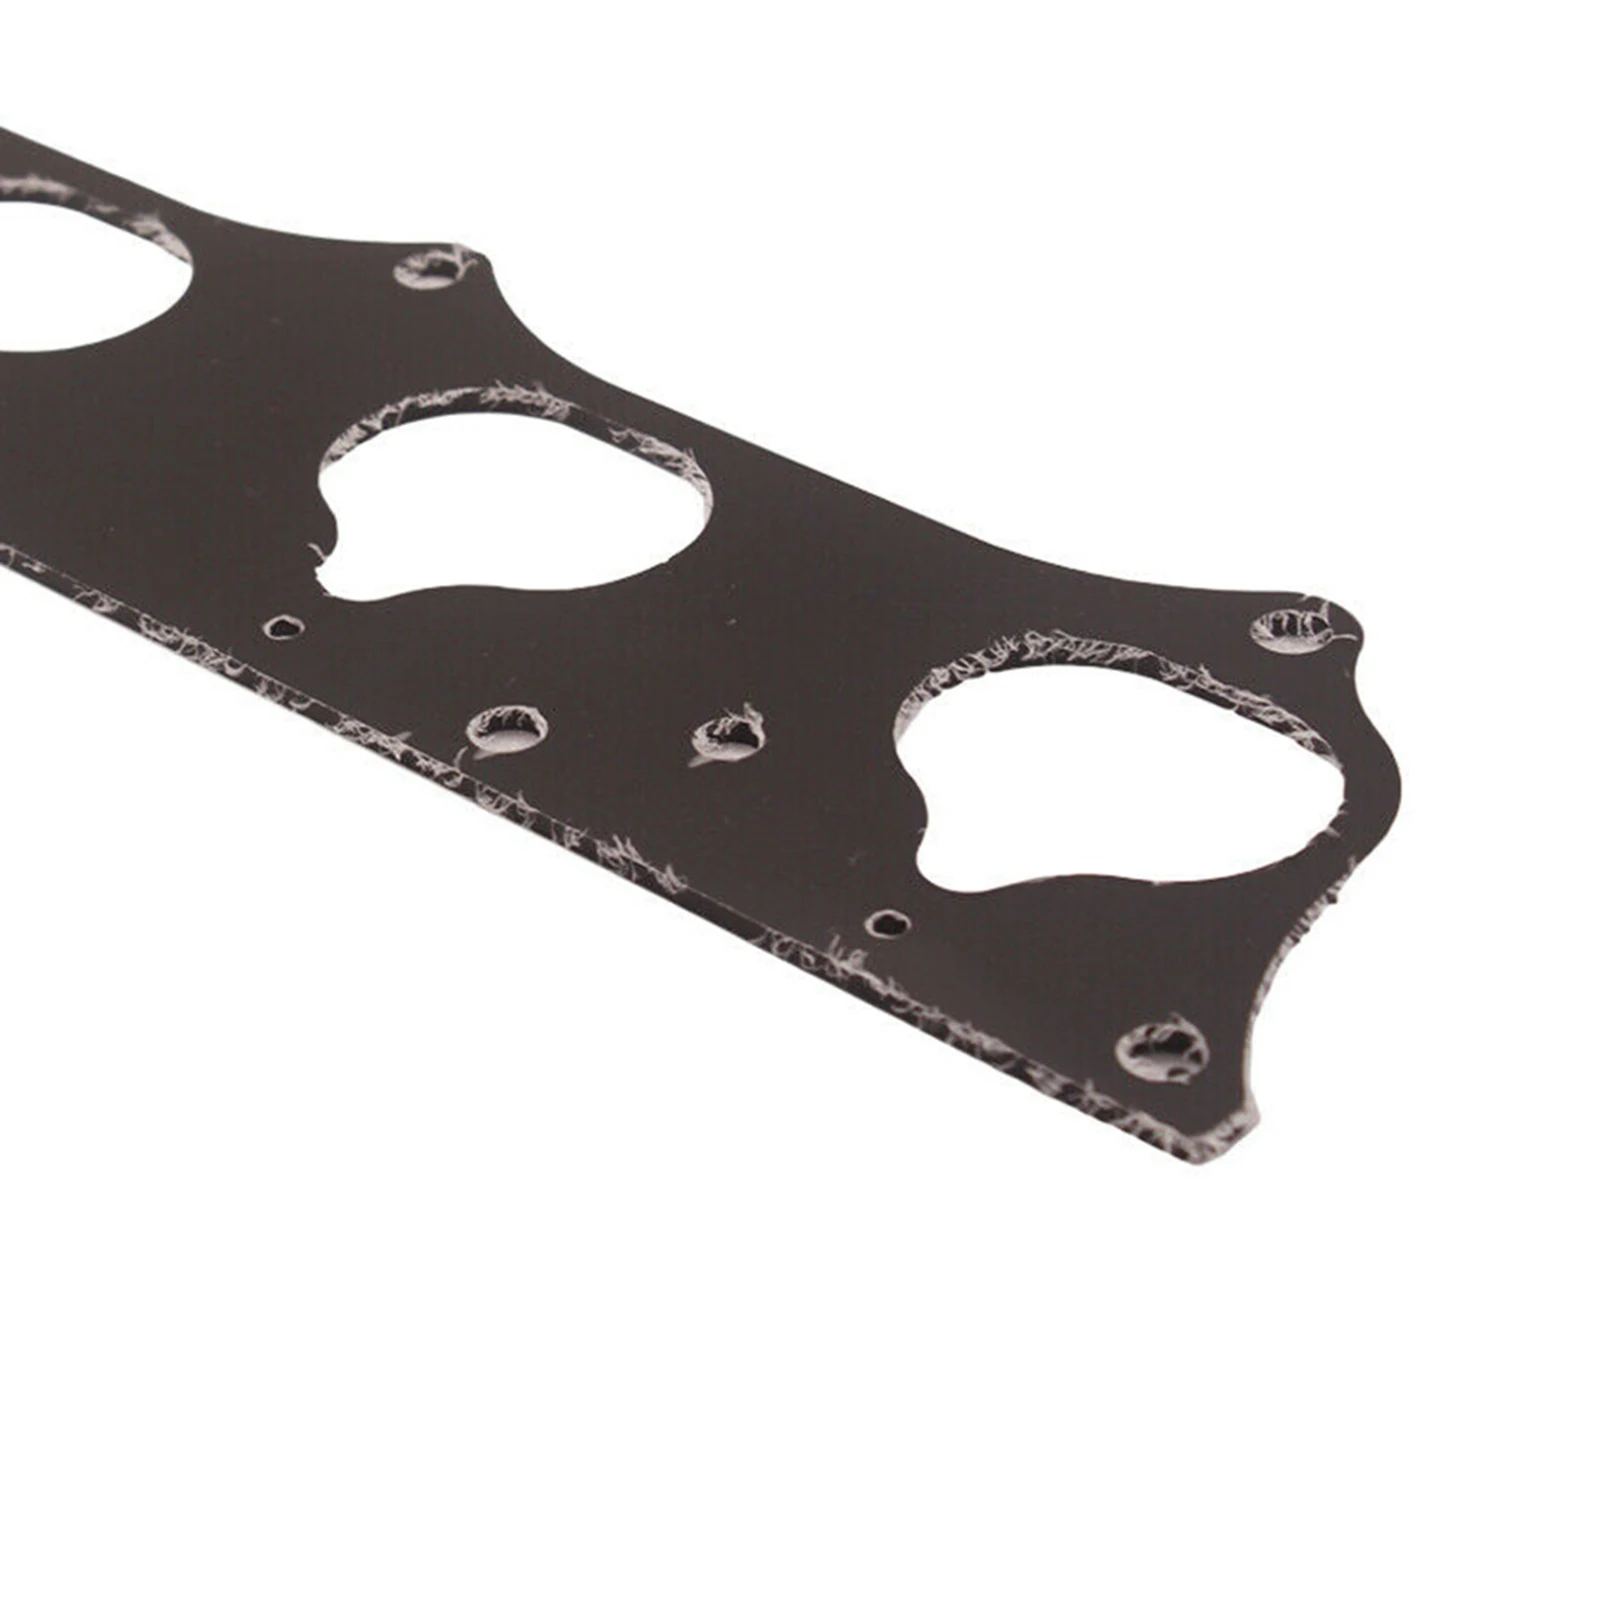 Intake Manifold Gasket Thermal Throttle Body Gasket for  Si And Acura RSX for Acura RSX Type-S Base K Series RSX - EP3